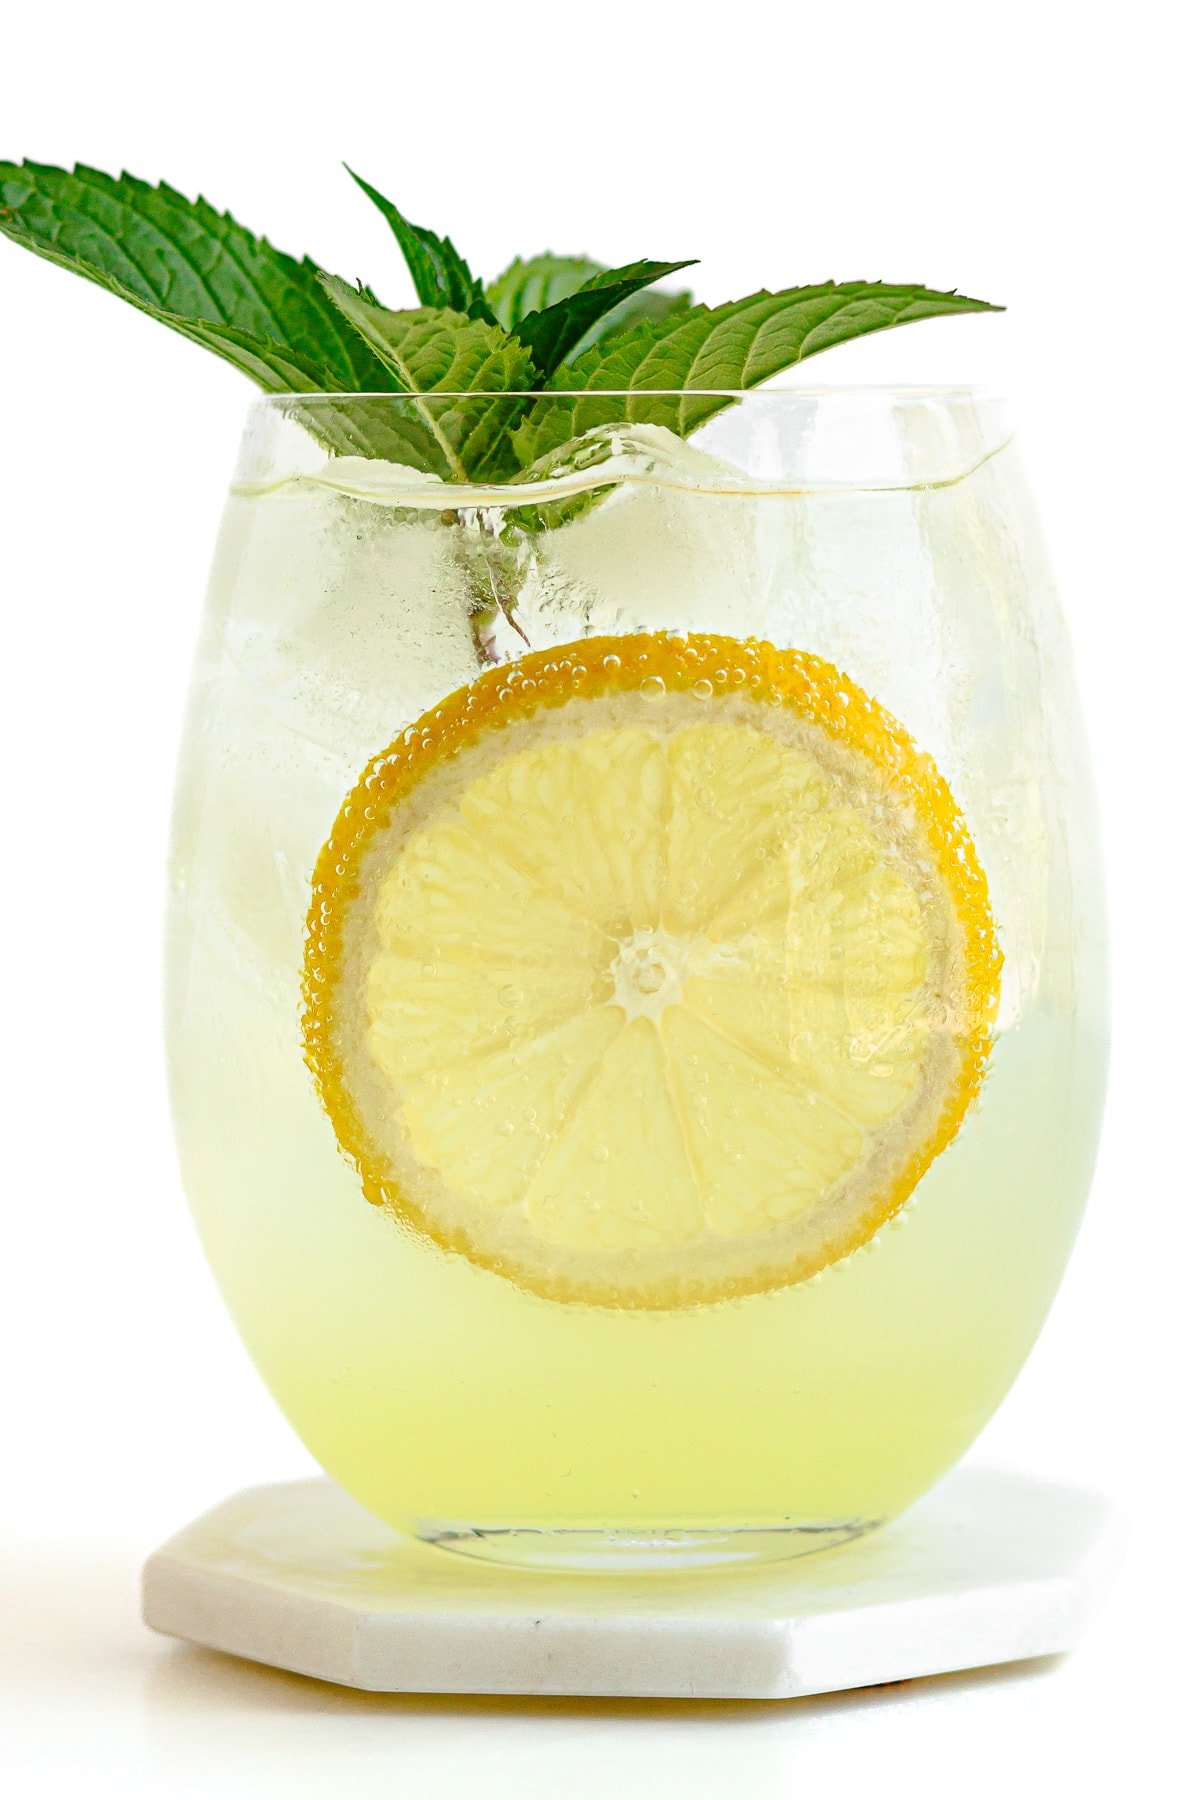 Glass of limoncello spritz garnished with fresh mint and a slice of lemon.